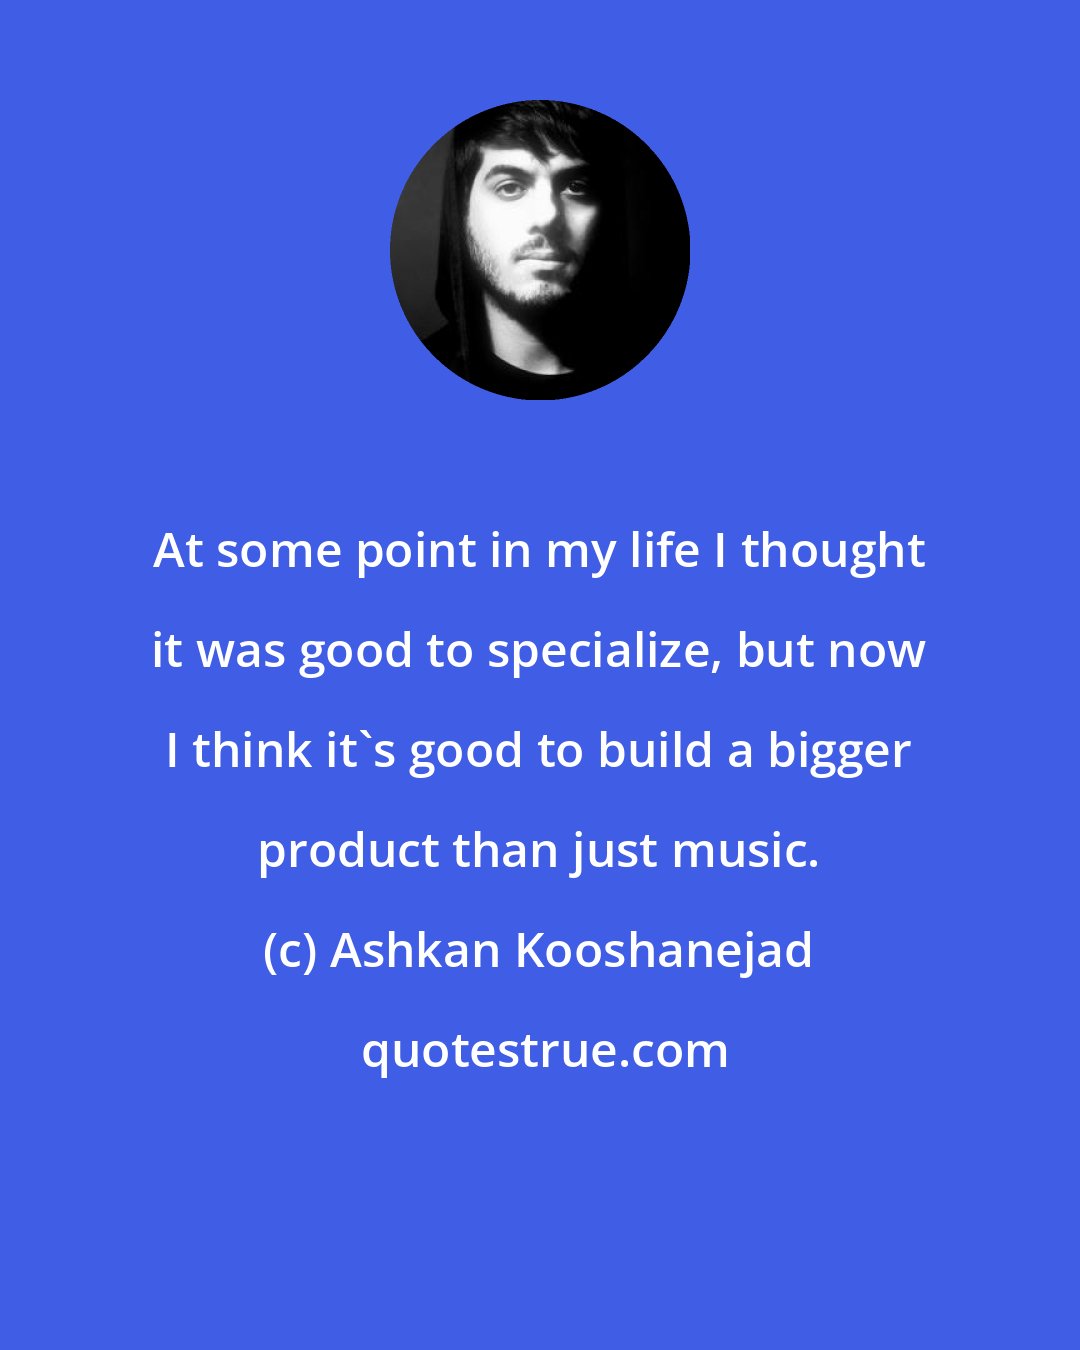 Ashkan Kooshanejad: At some point in my life I thought it was good to specialize, but now I think it's good to build a bigger product than just music.